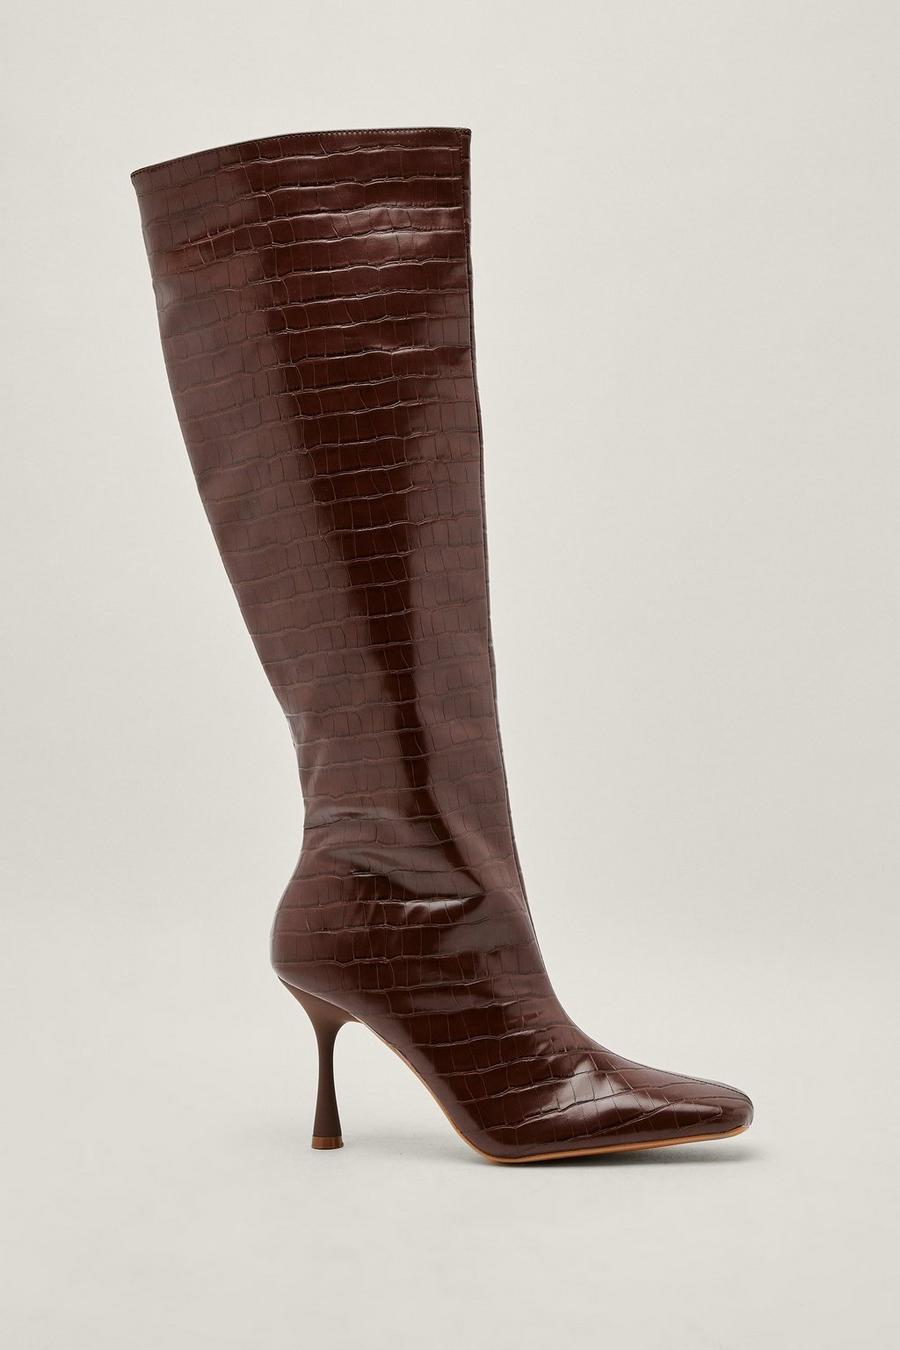 Stretch Faux Croc Stiletto Knee High Boots